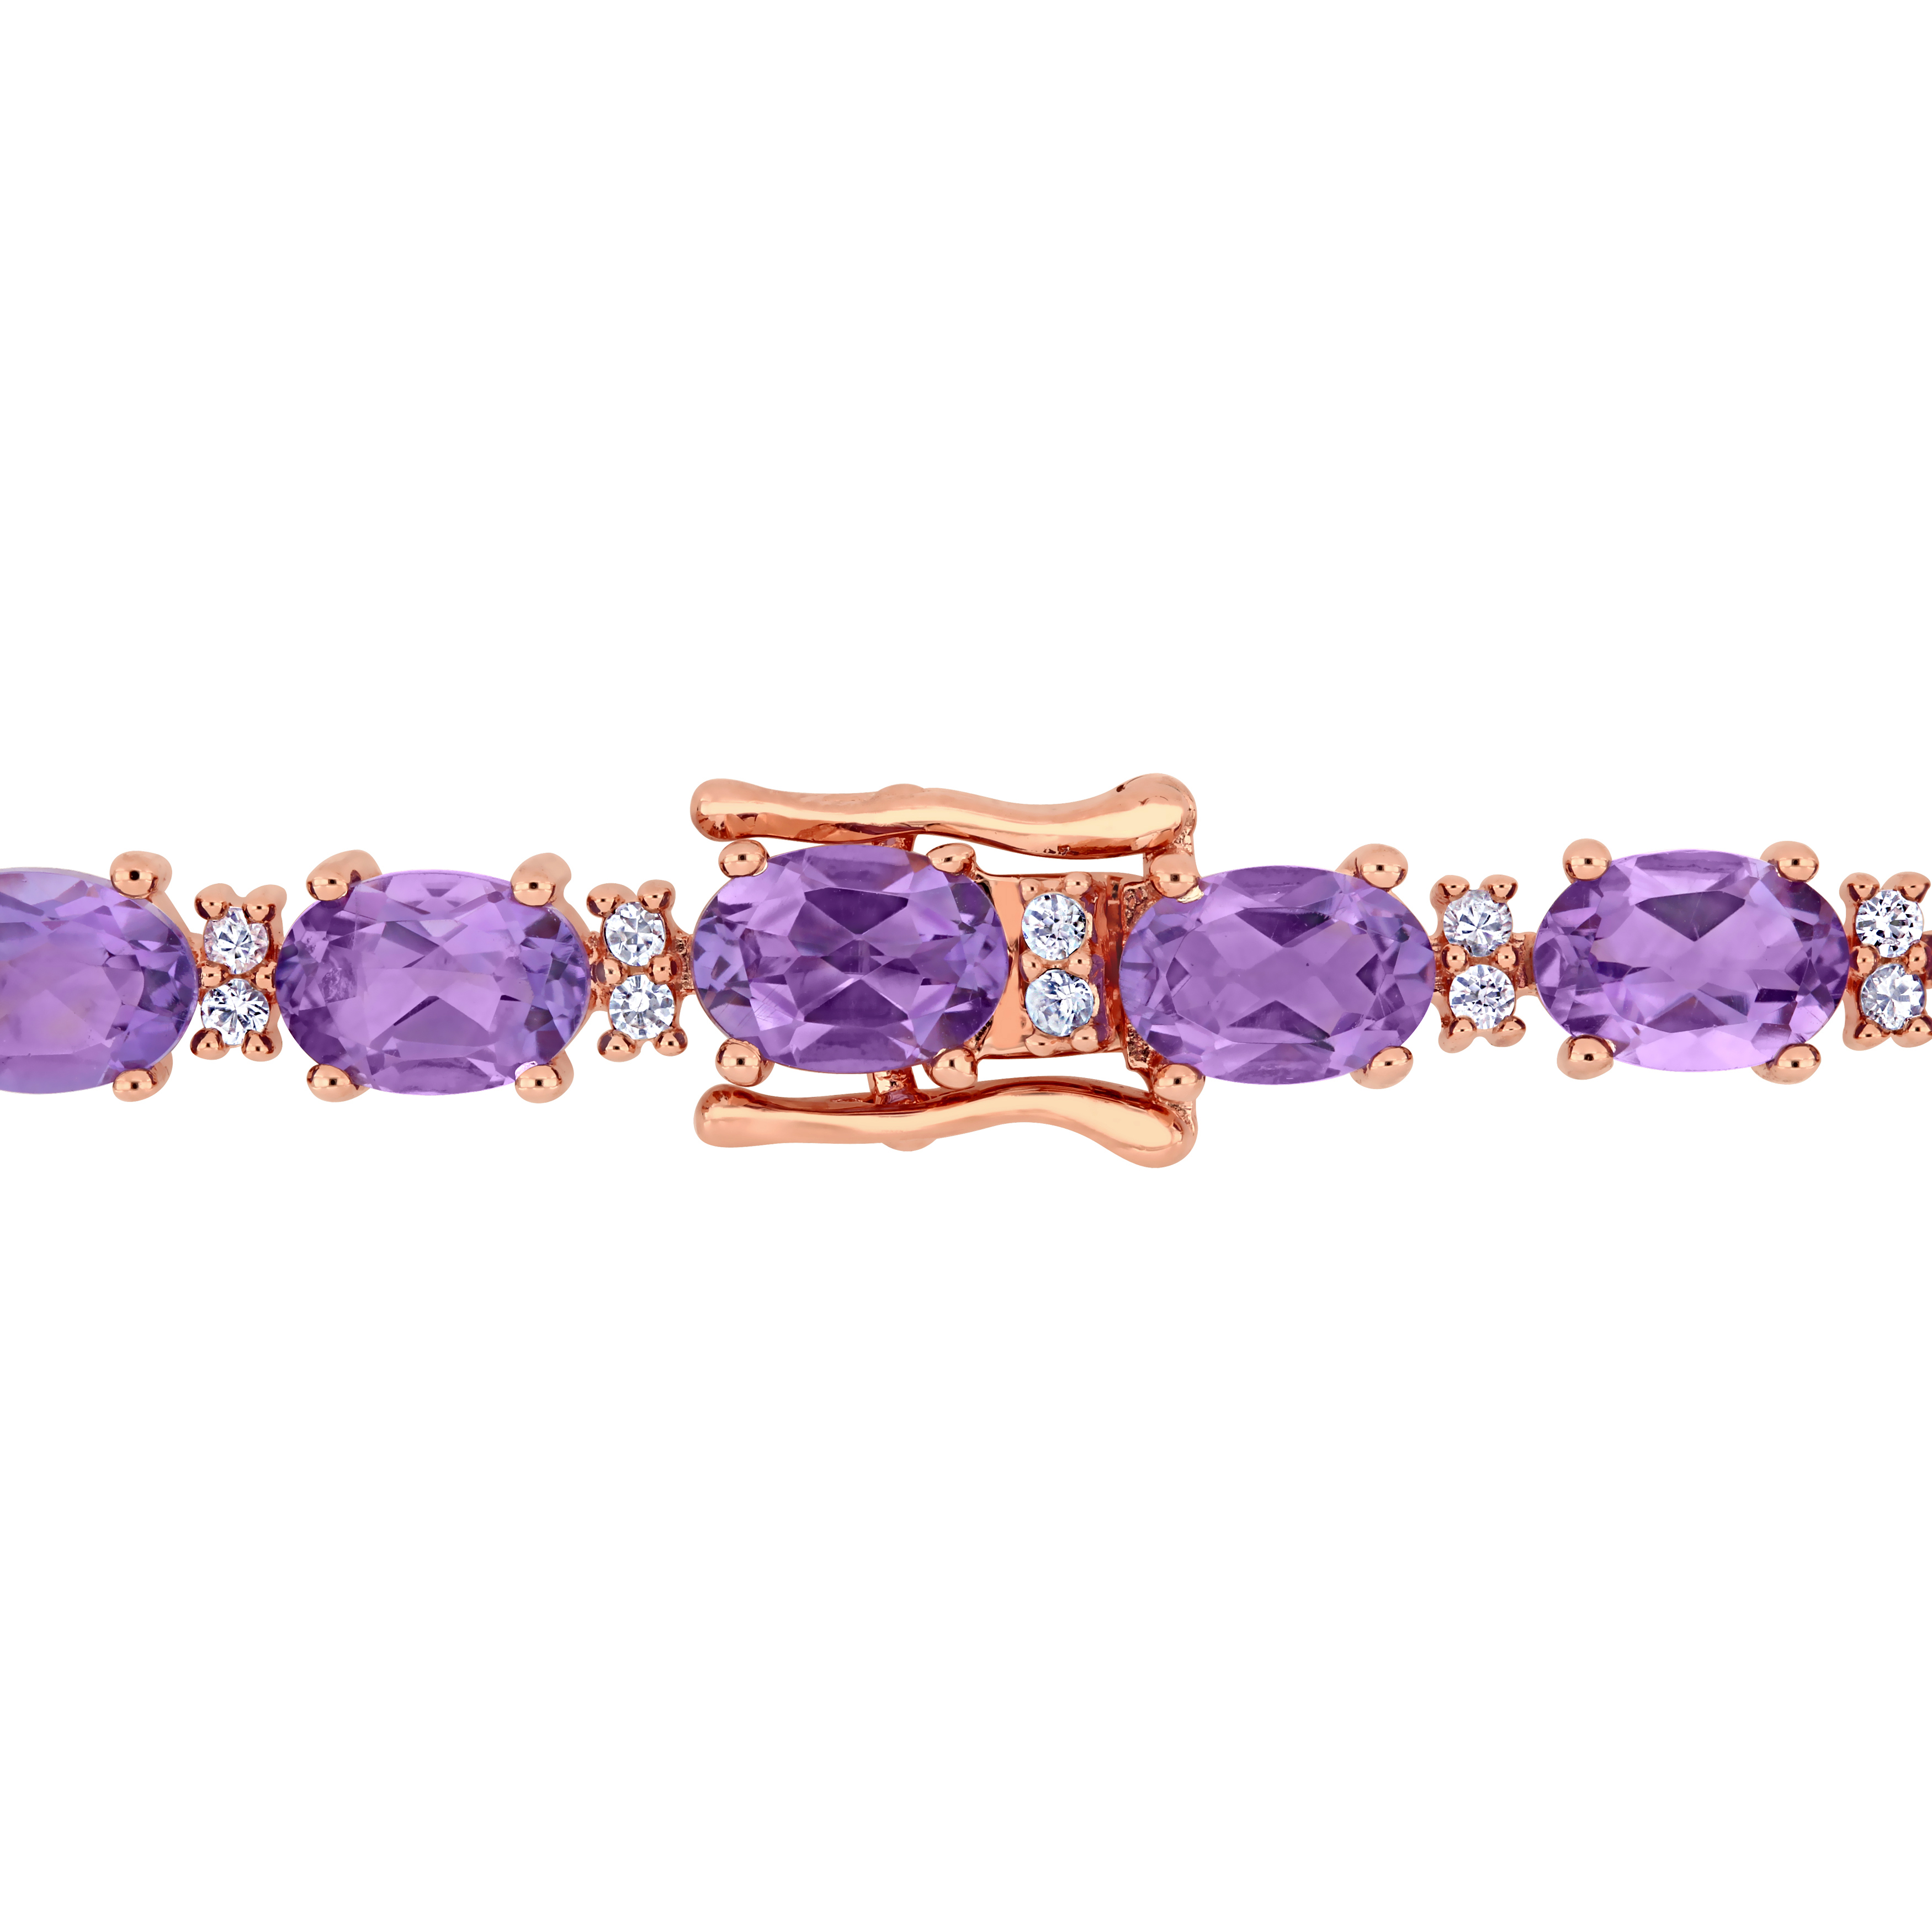 14 5/8 CT TGW Amethyst and White Sapphire Tennis Bracelet in Rose Plated Sterling Silver